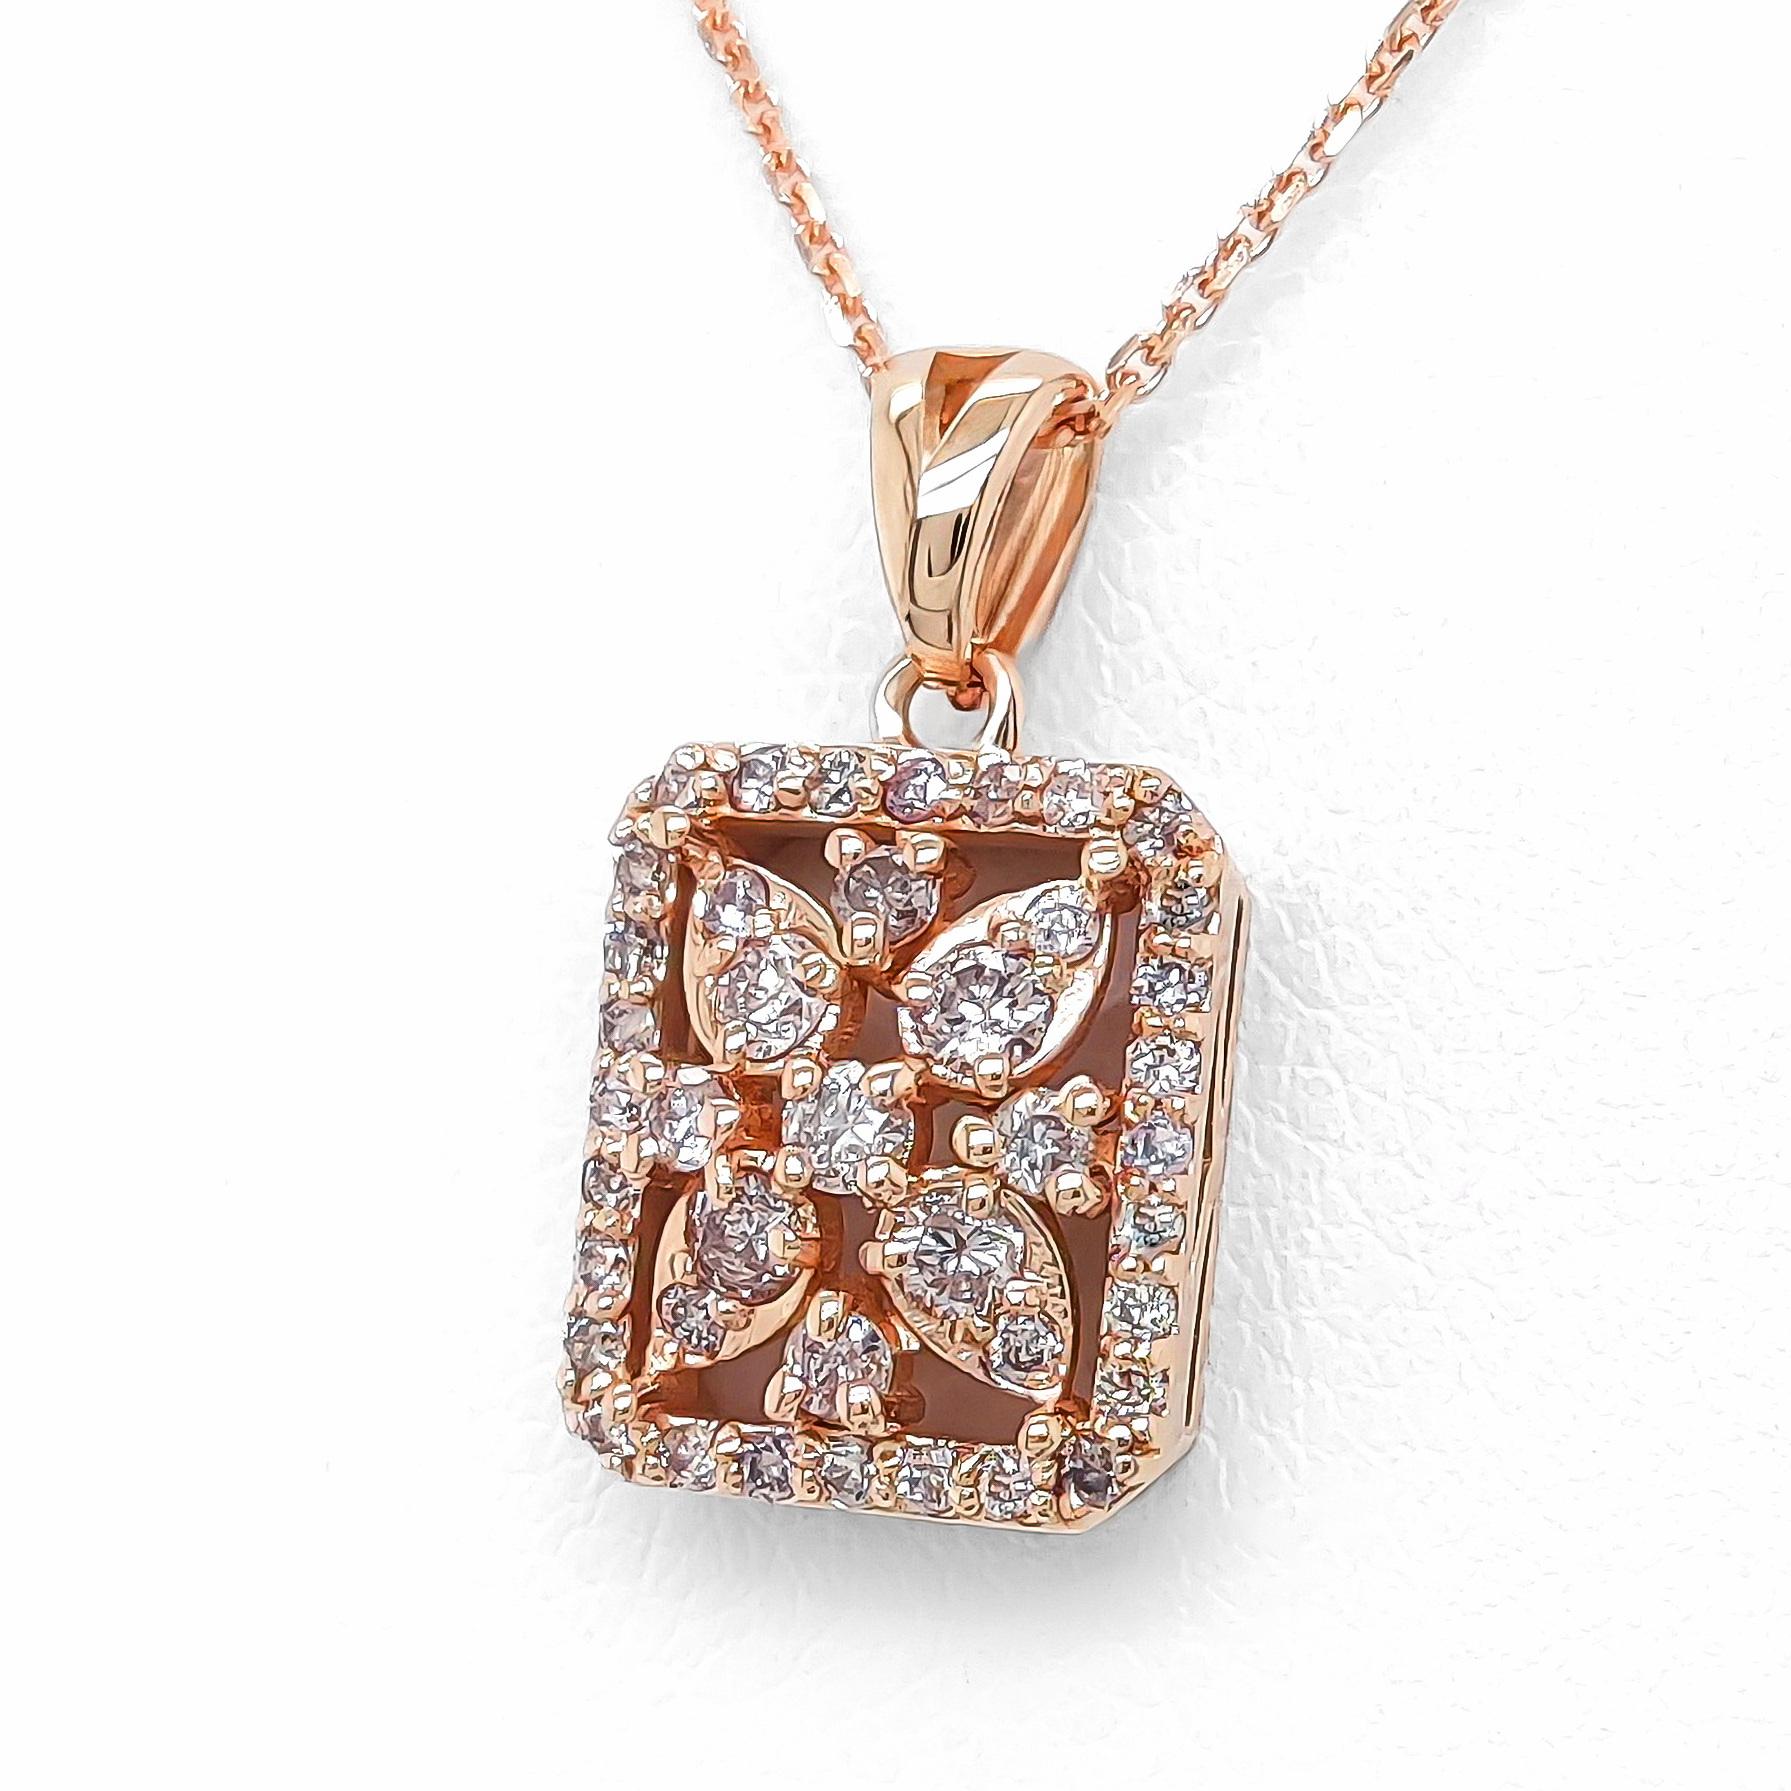 FOR CUSTOMERS FROM THE USA NO VAT

Elevate your style with this enchanting pendant featuring a captivating ensemble of 41 natural round brilliant diamonds. With a total weight of 0.38 carat, these mesmerizing light pink gems bring a touch of natural